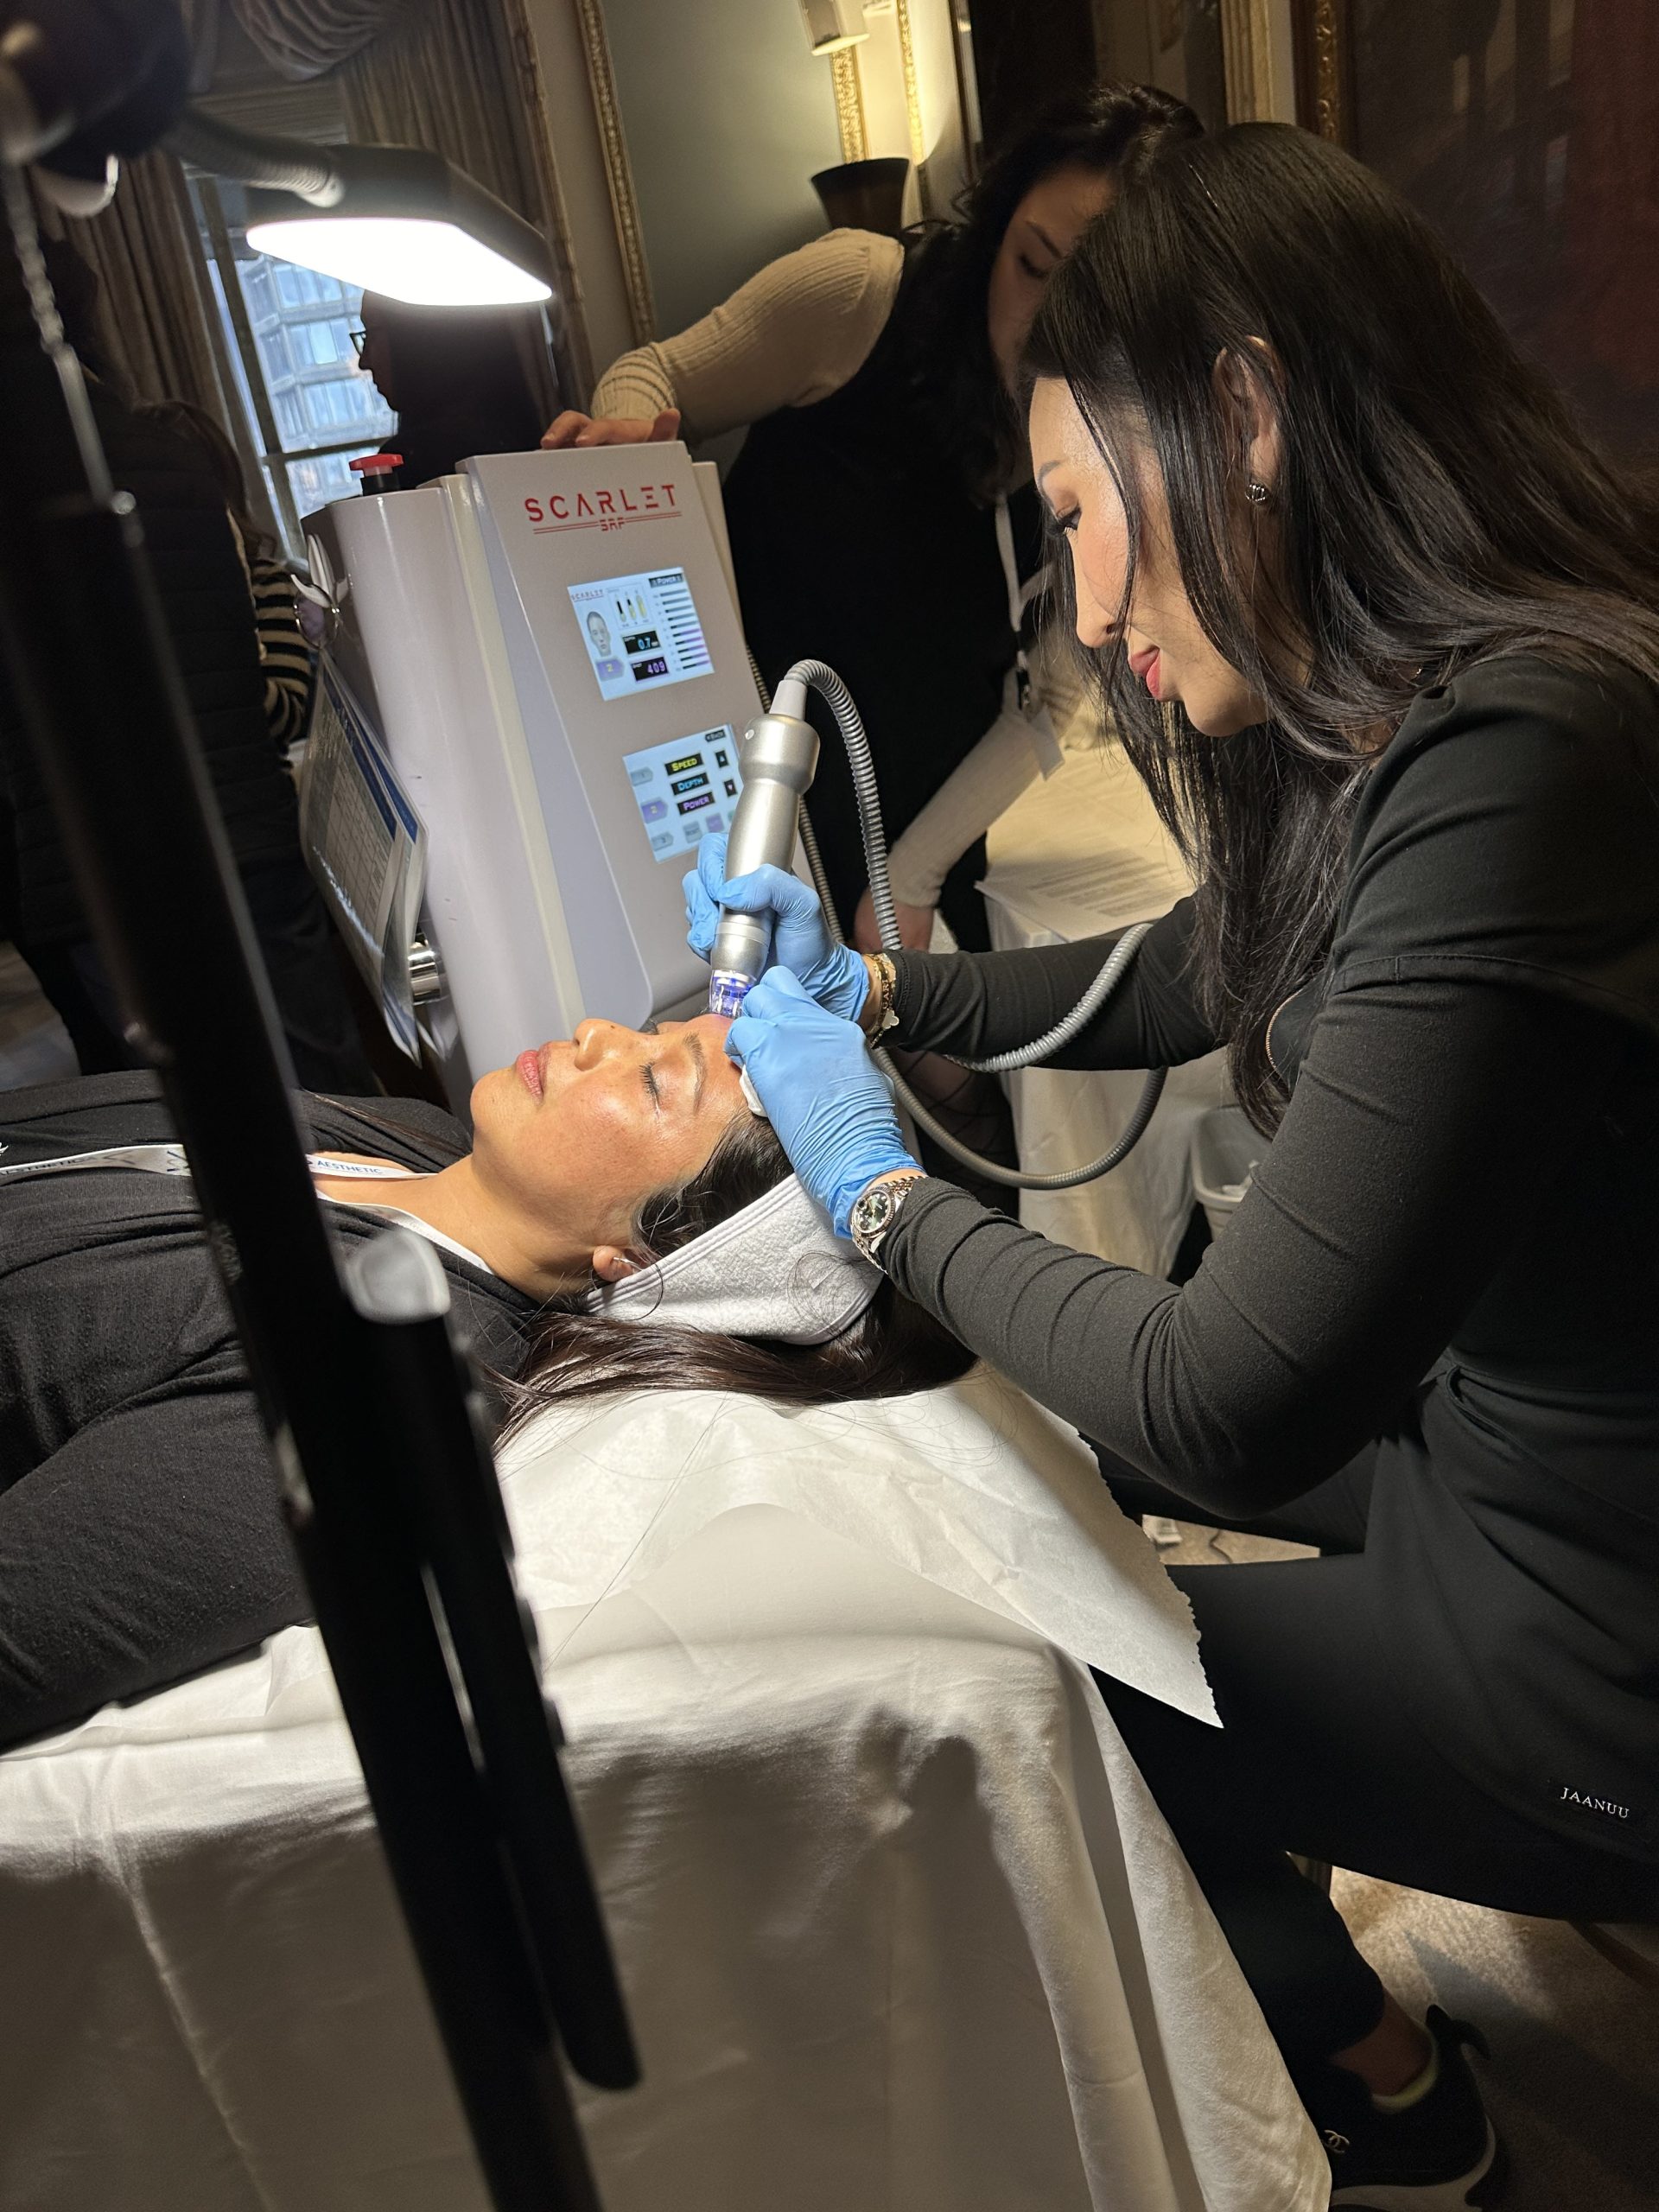 Providers can try RF microneedling and other treatments at an AMP event